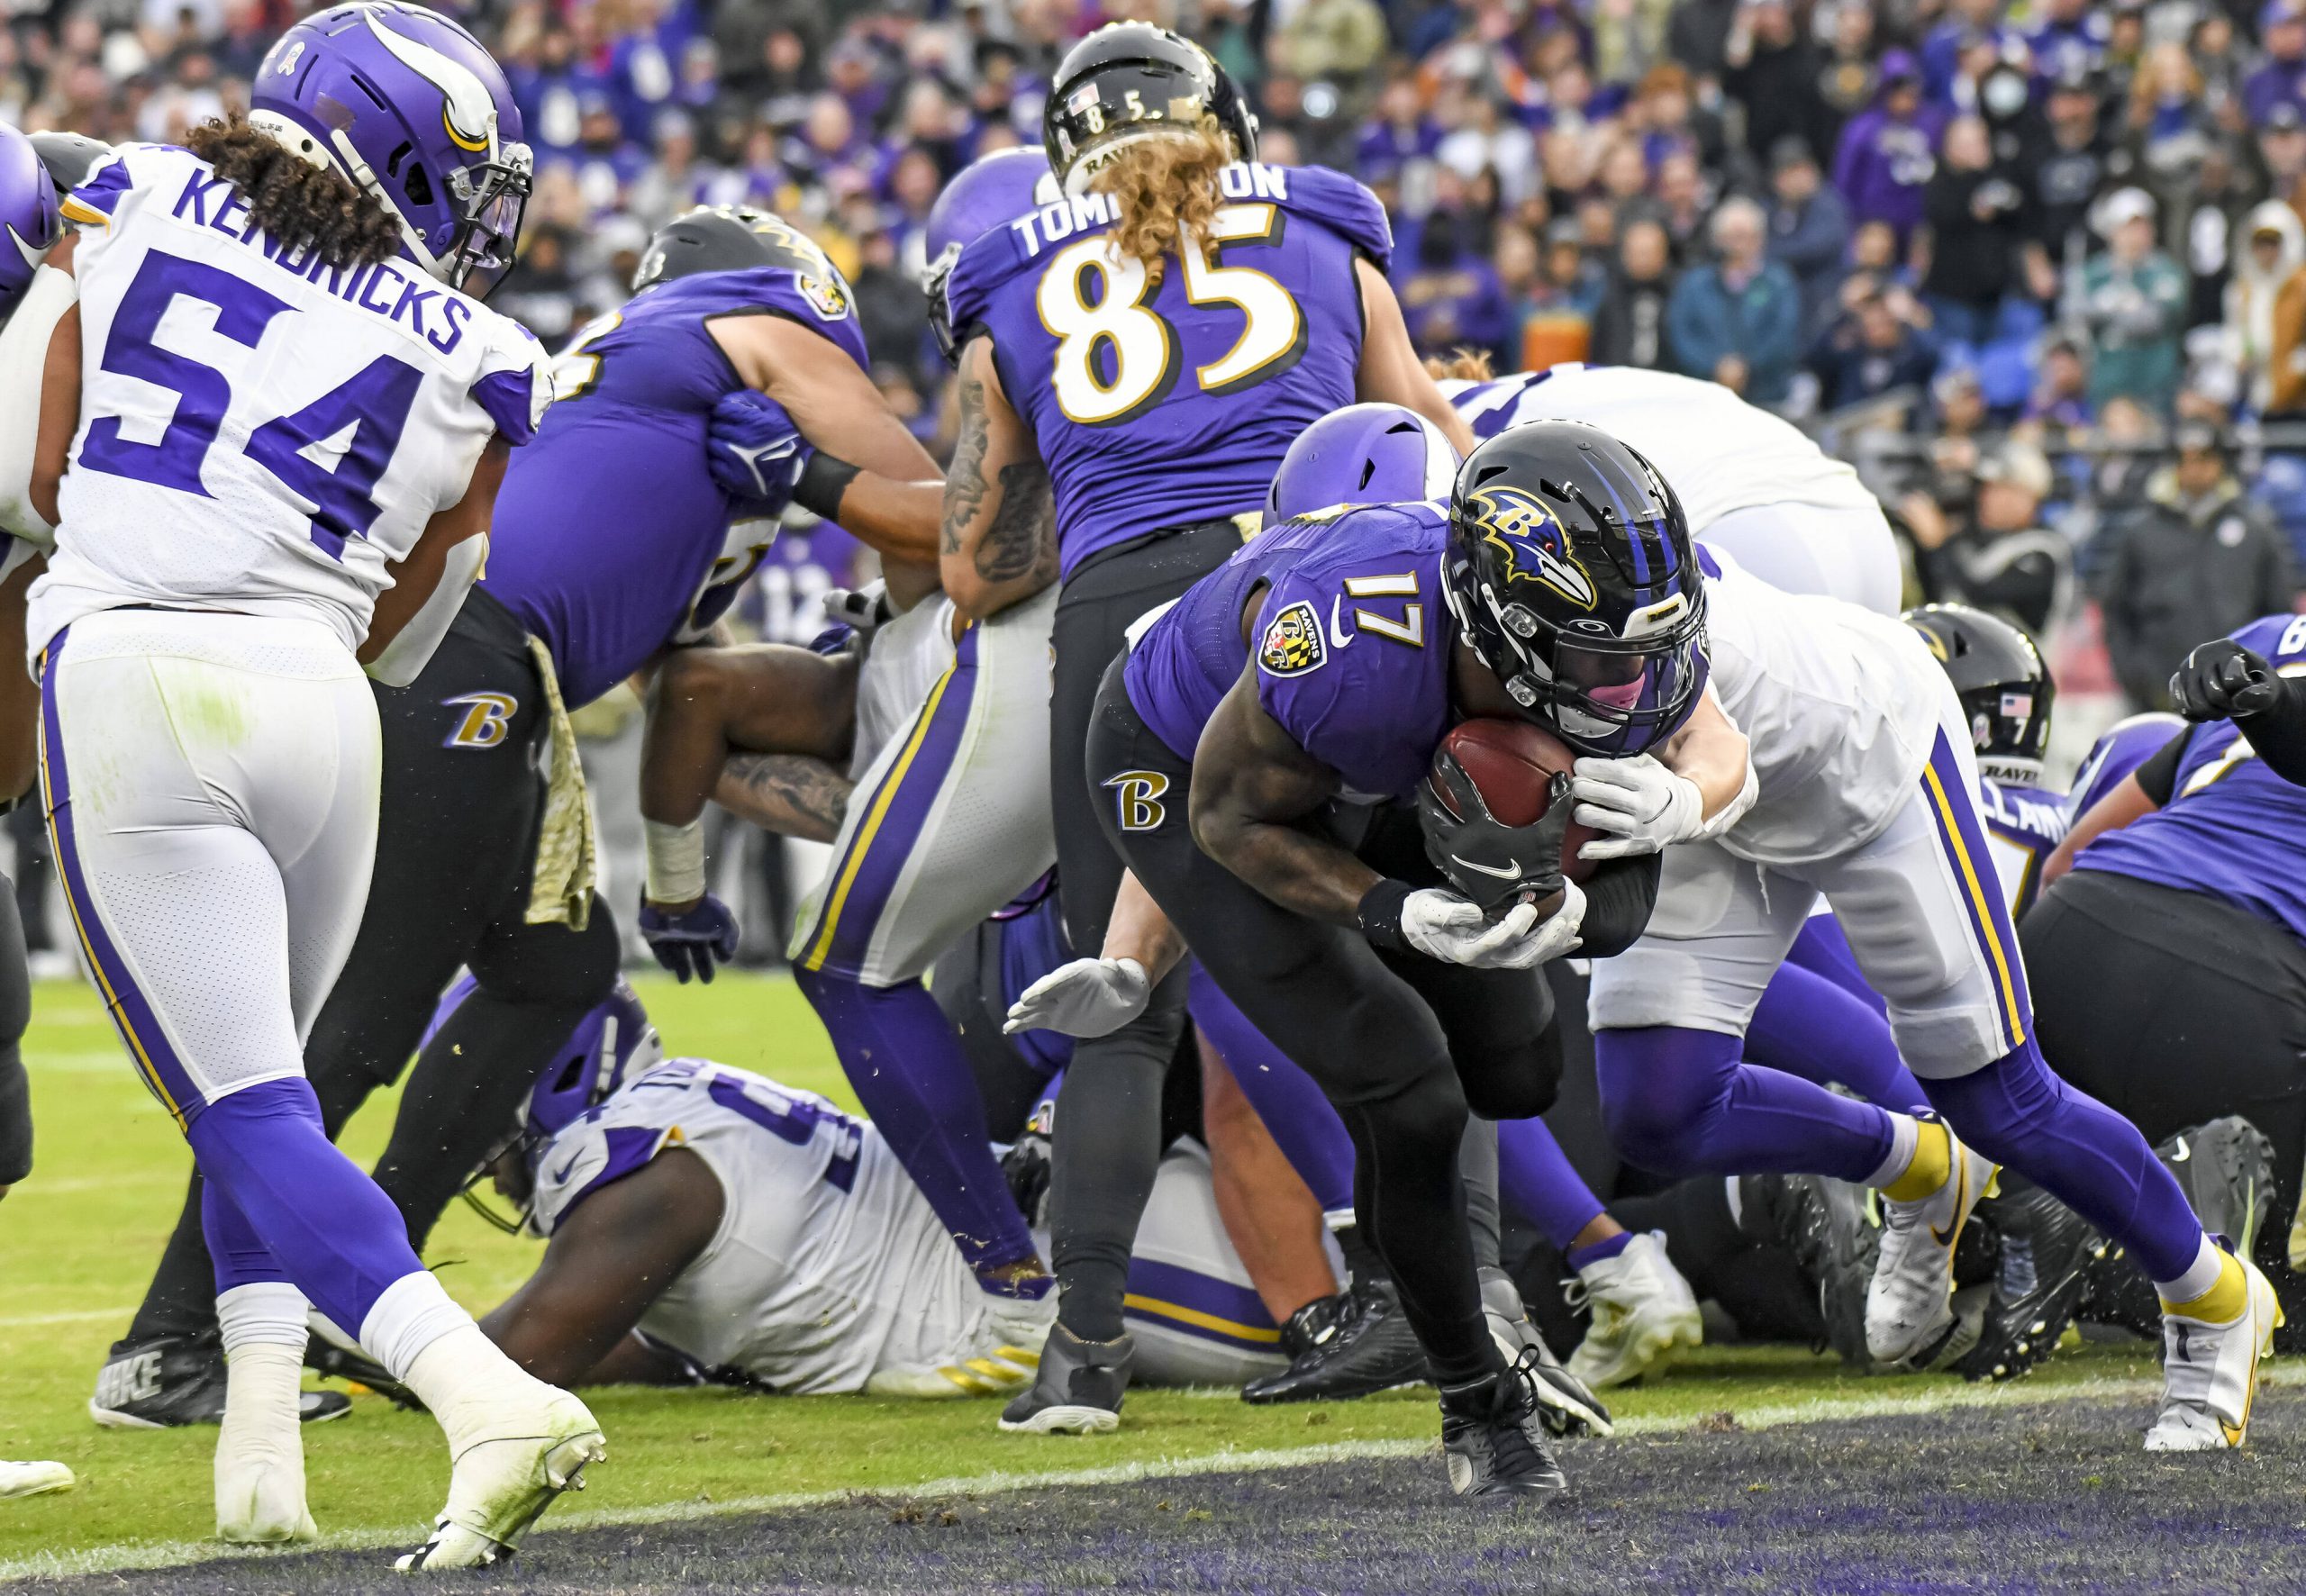 BALTIMORE, MD - NOVEMBER 07: Baltimore Ravens running back Le Veon Bell (17) scores on a rushing touchdown in the fourth